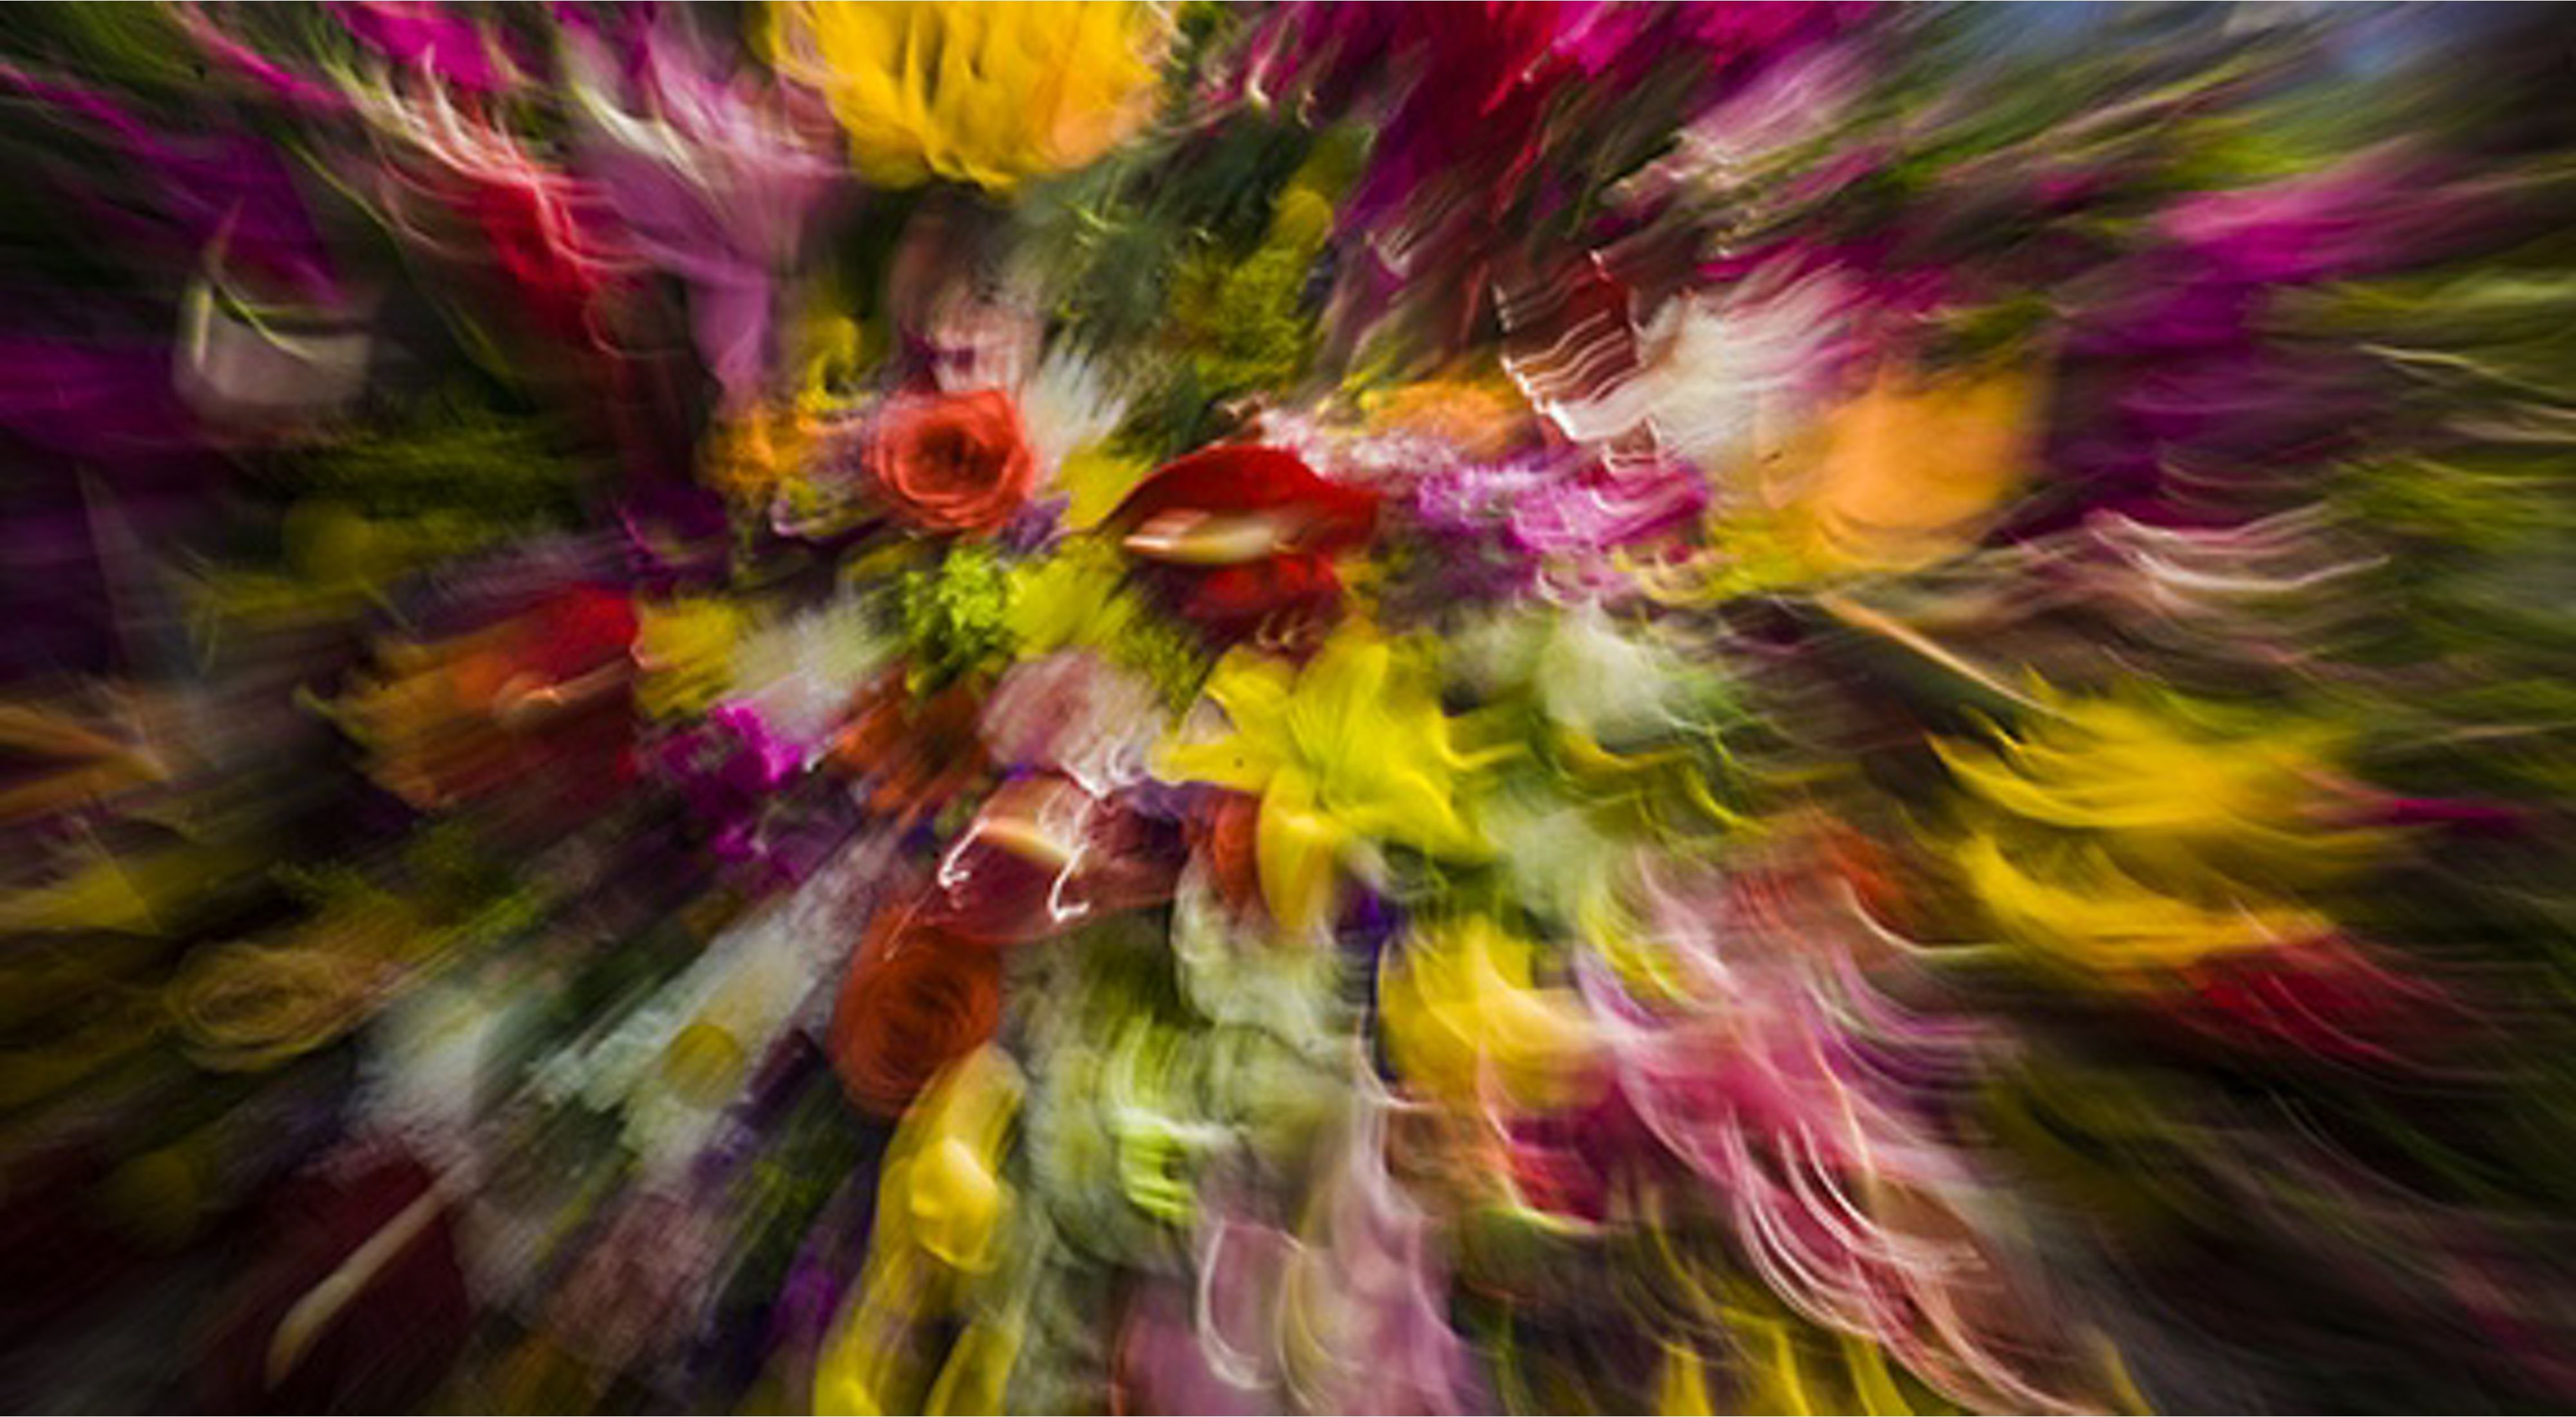 A bouquet of flowers with blossoms of red, yellow, magenta and white seems to swirl and move in a riot of color.